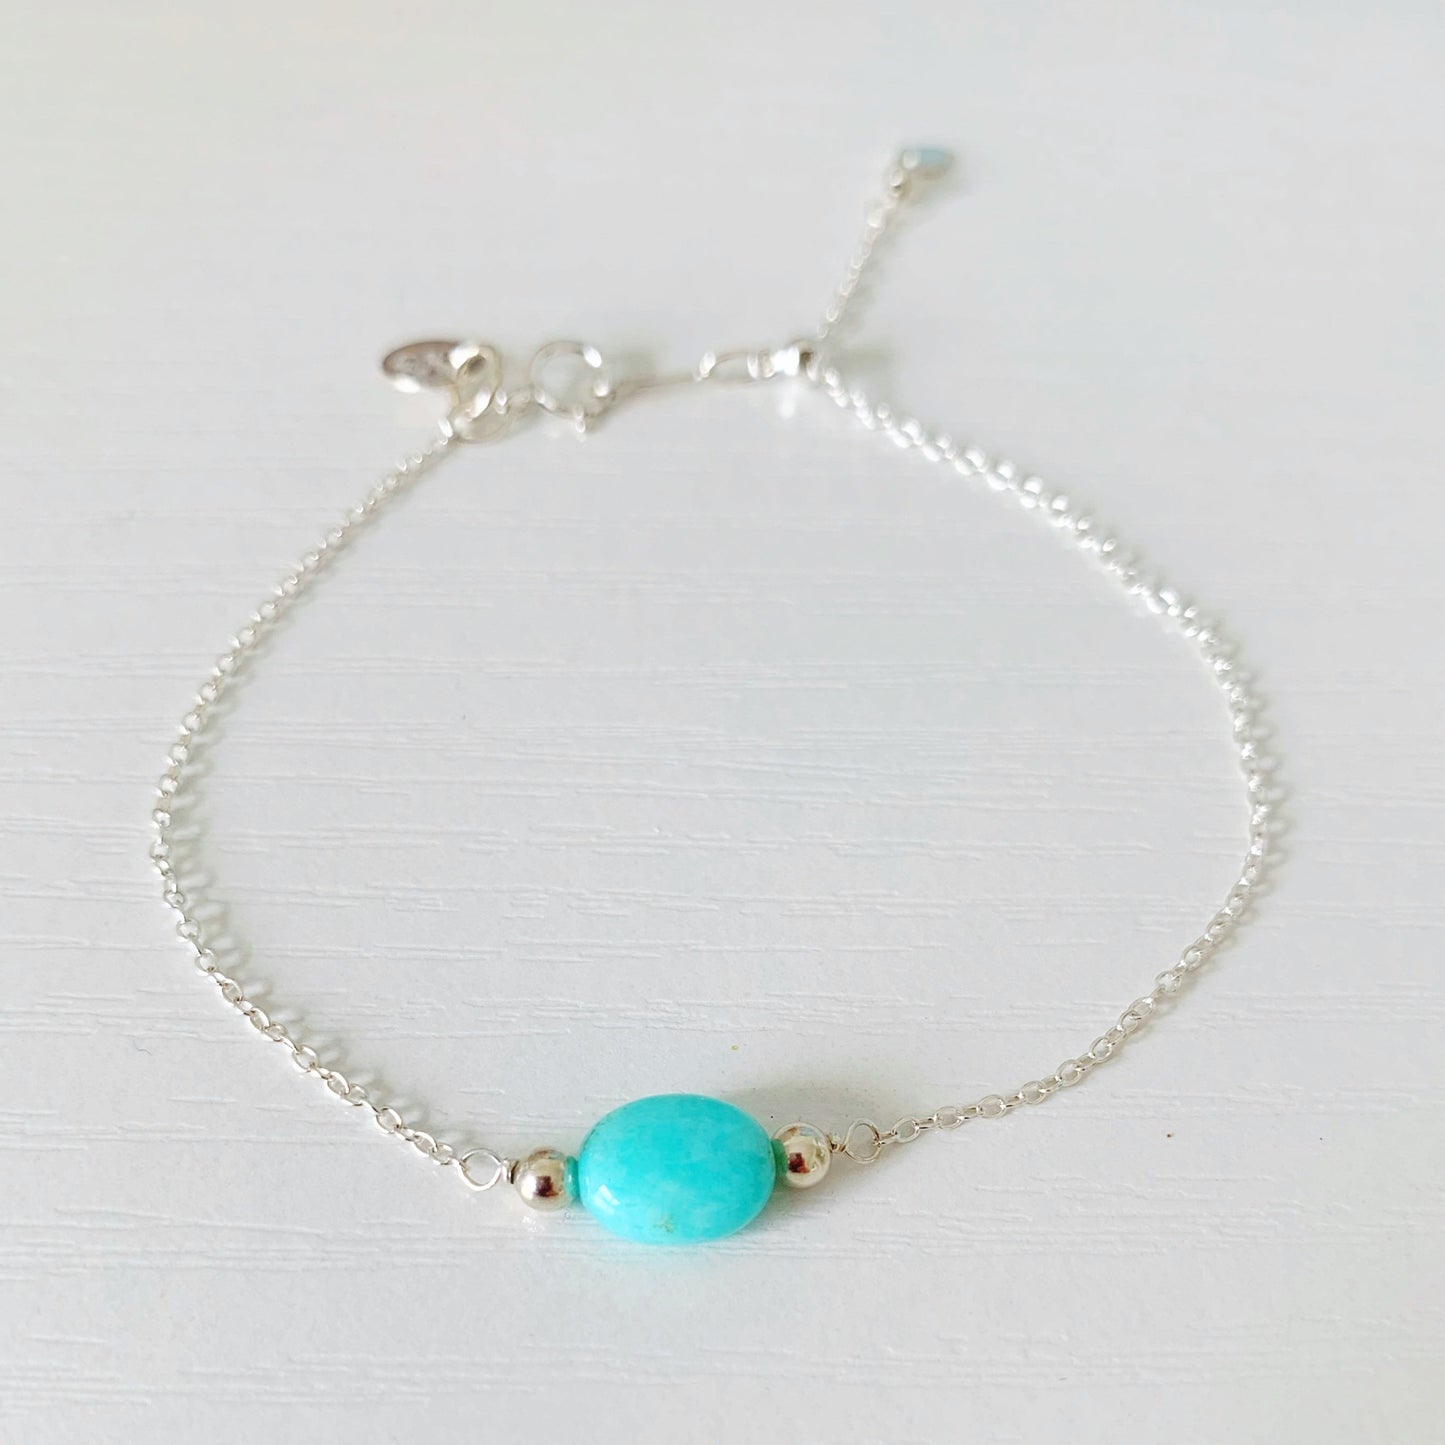 the laguna bracelet is created on sterling silver chain with an adjustable slide clasp and an oval amazonite bead at the center. this bracelet is pictured on a white surface